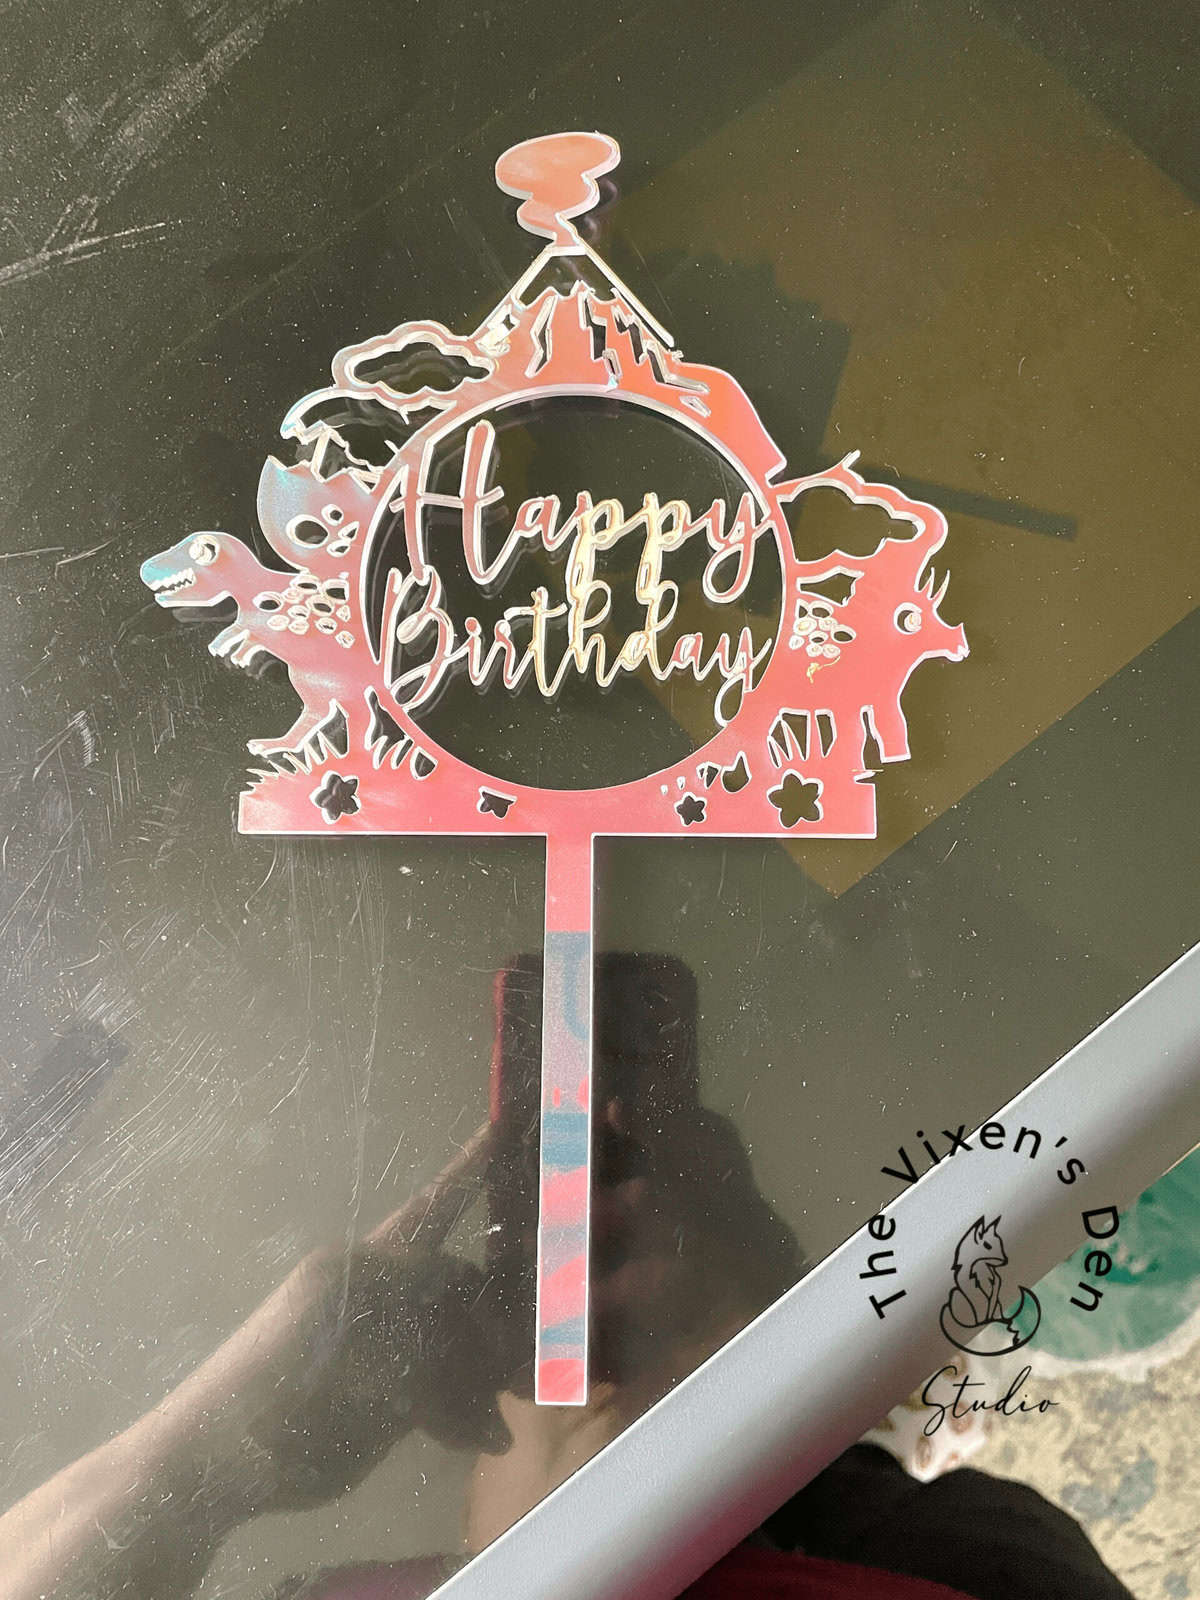 A "Happy Birthday" cake topper with farm animal designs, featuring a cow, pig, and chick, and a barn in the background, placed on a reflective surface.